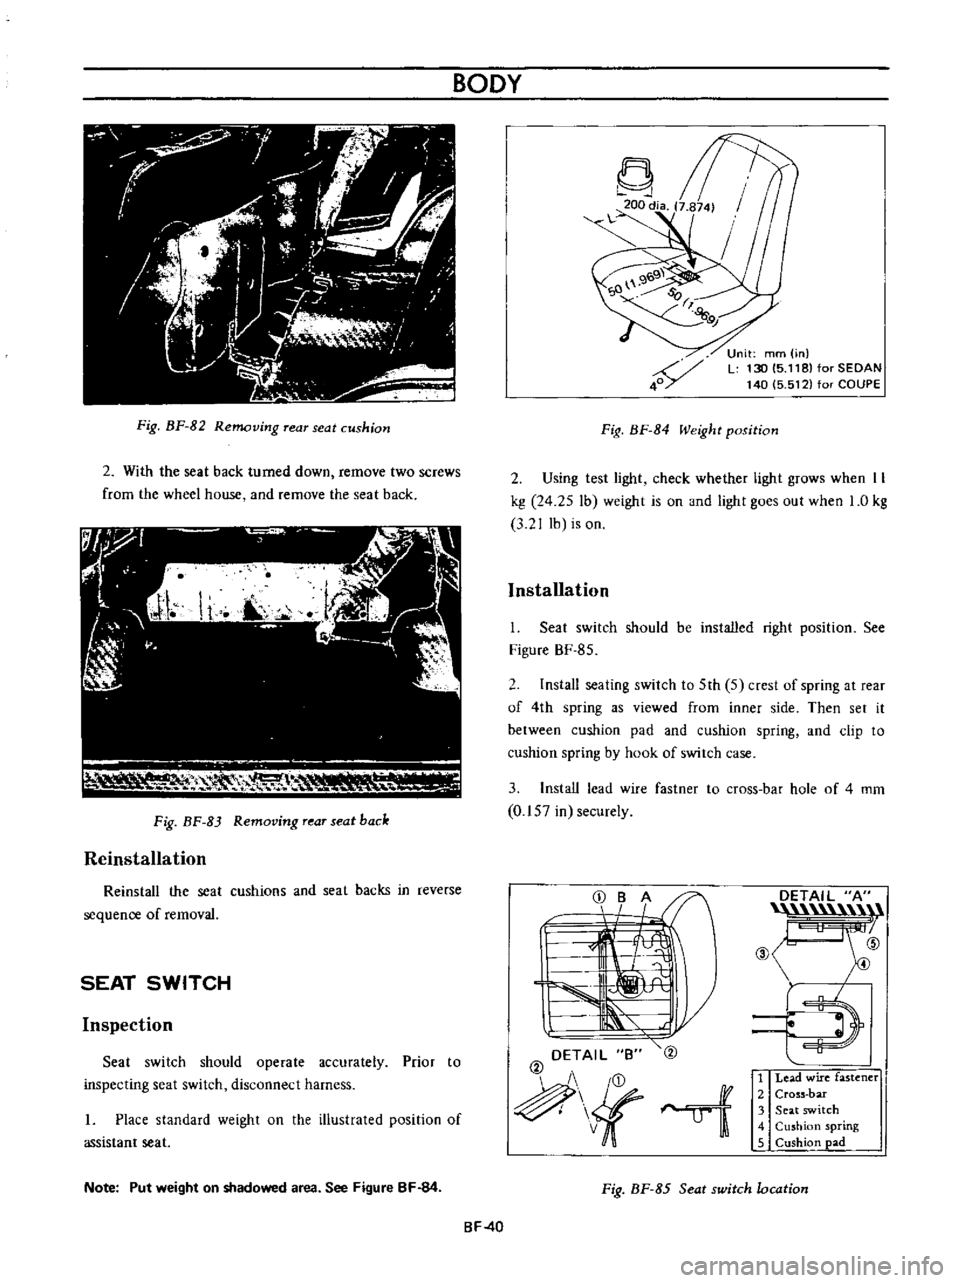 DATSUN B110 1973  Service Owners Guide 
Fig 
BF 
82

Removing 
rear 
seat

cushion

2

With 
the

seat 
back 
turned 
down

remove 
two

screws

from 
the 
wheel 
house 
and

remove 
the

seat 
back

111 
I

V

RH

0 
1

lr

Fig 
BF 
83

R